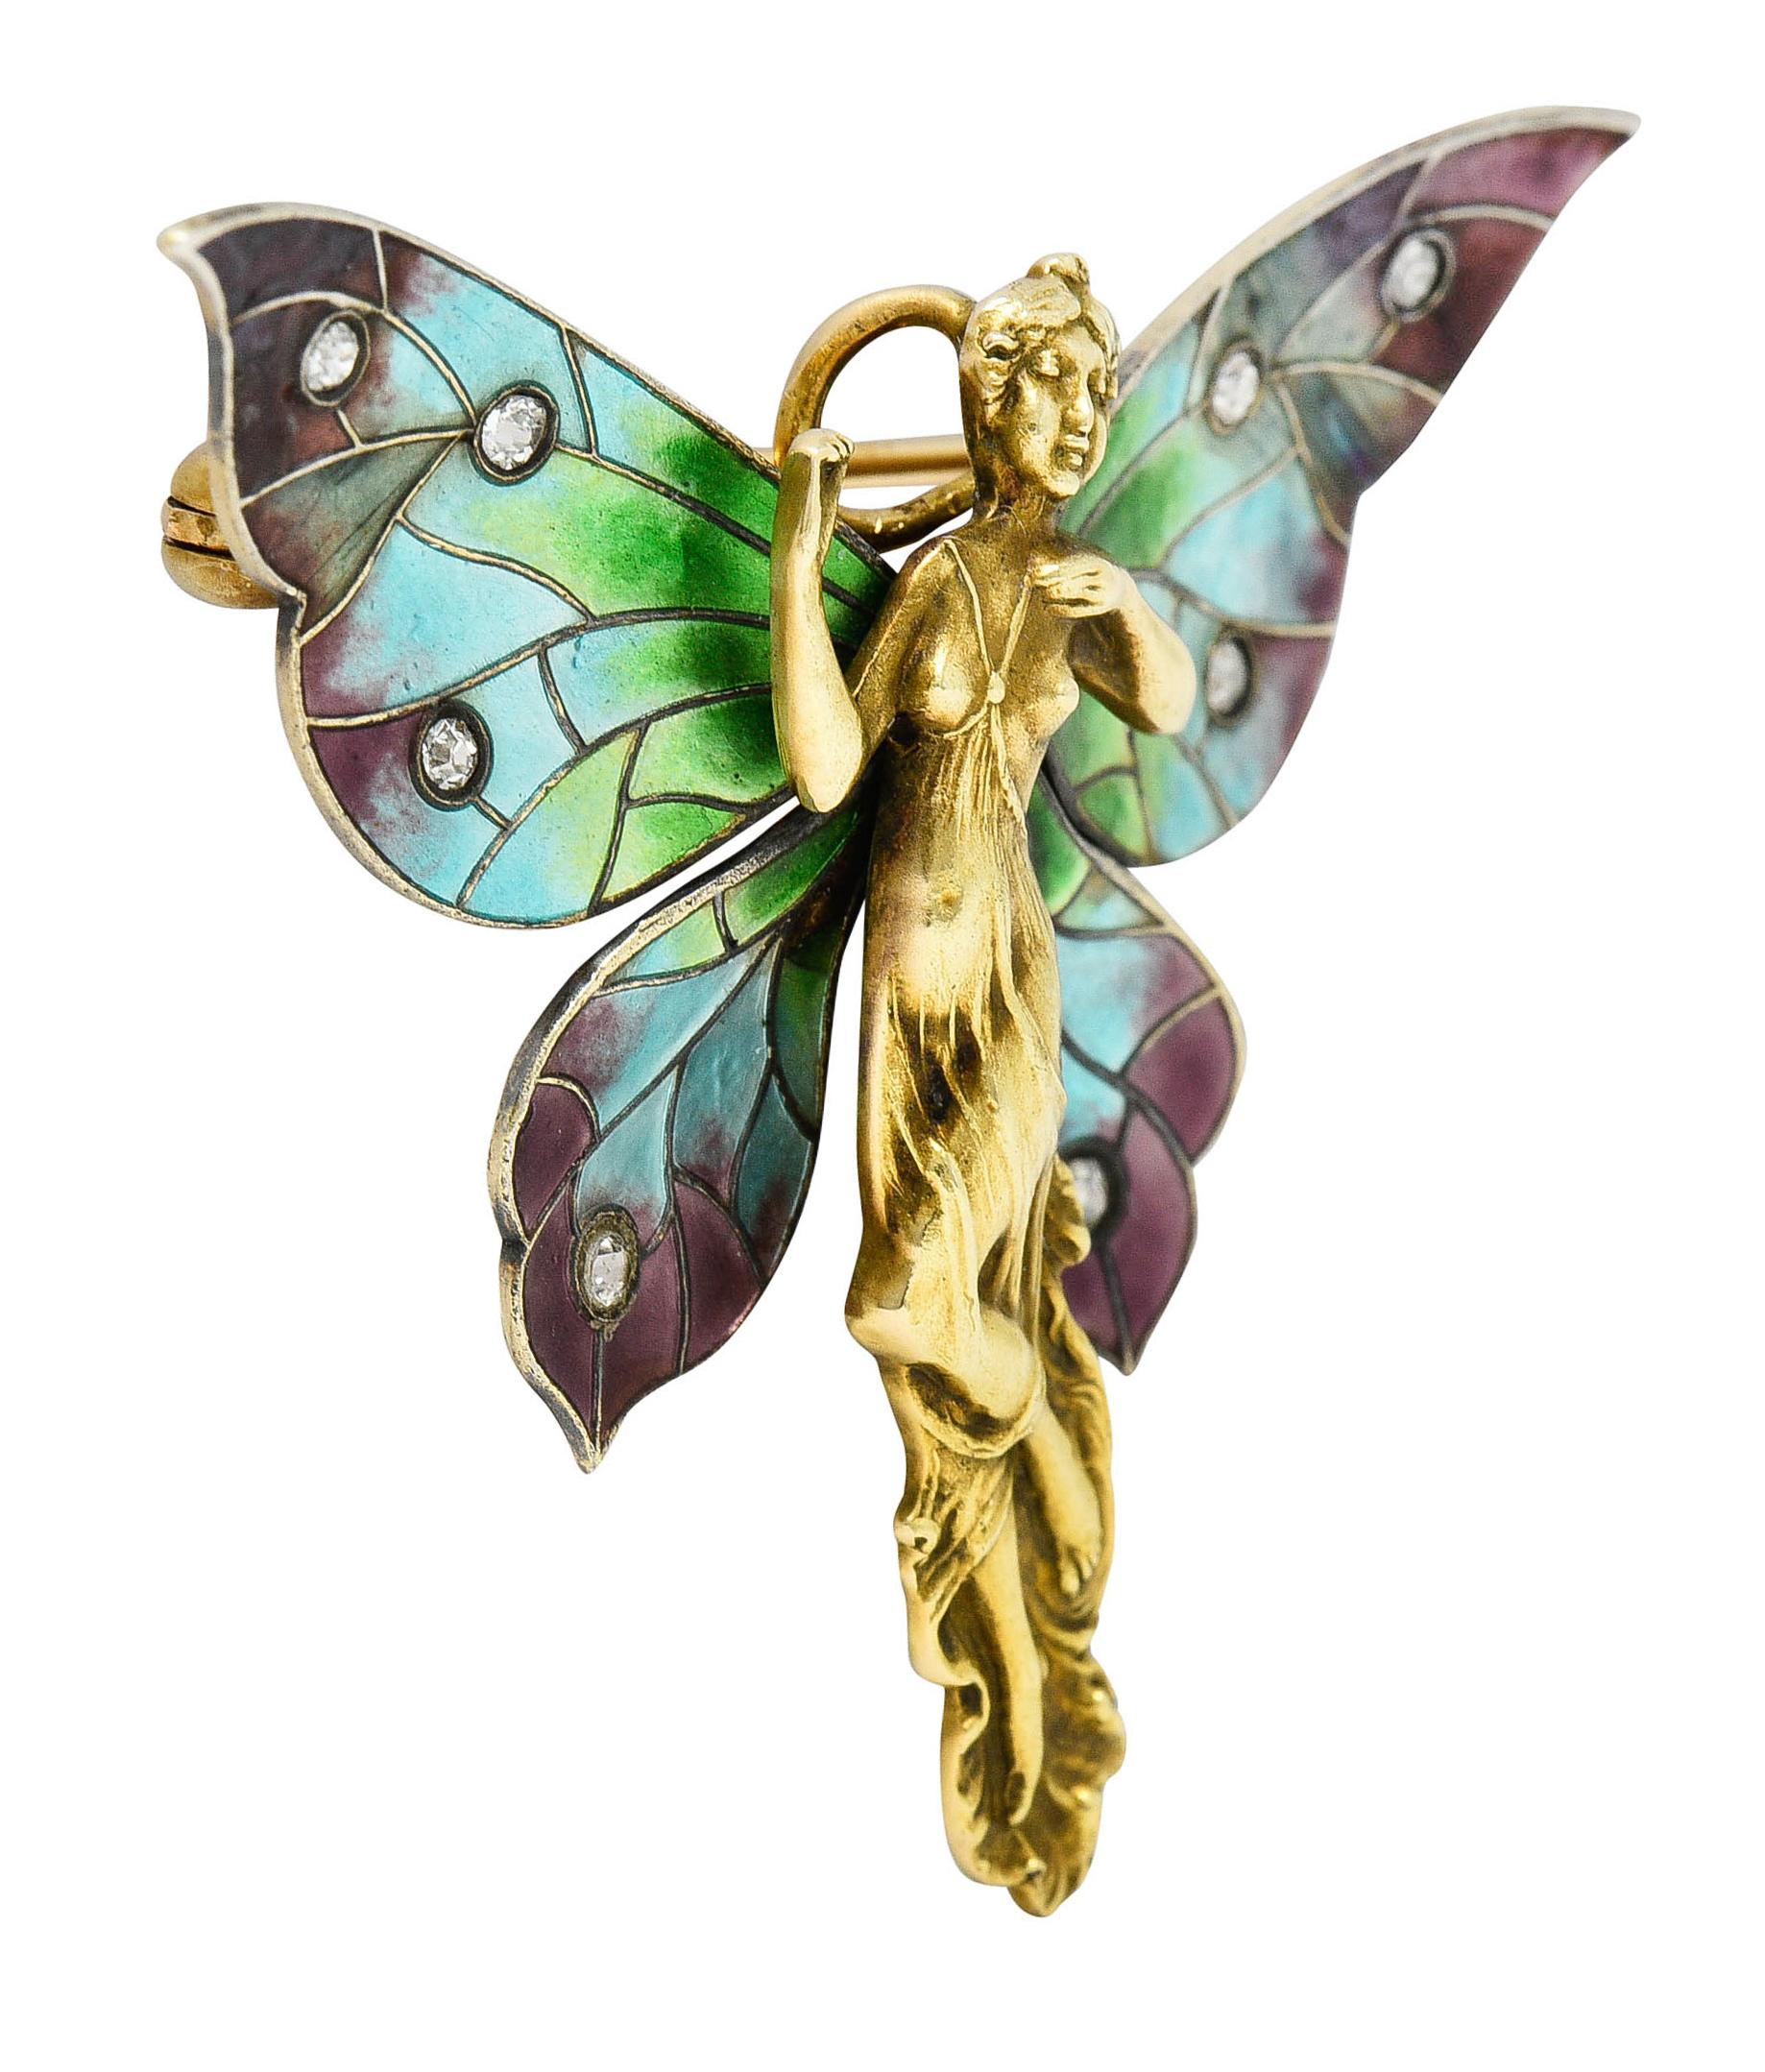 Brooch is designed as a fairy with a highly rendered female form

With spread wings shining with iridescent enamel - ombrè green, blue, and purple

No loss - excellent for age

Set with old single cut diamonds weighing approximately 0.18